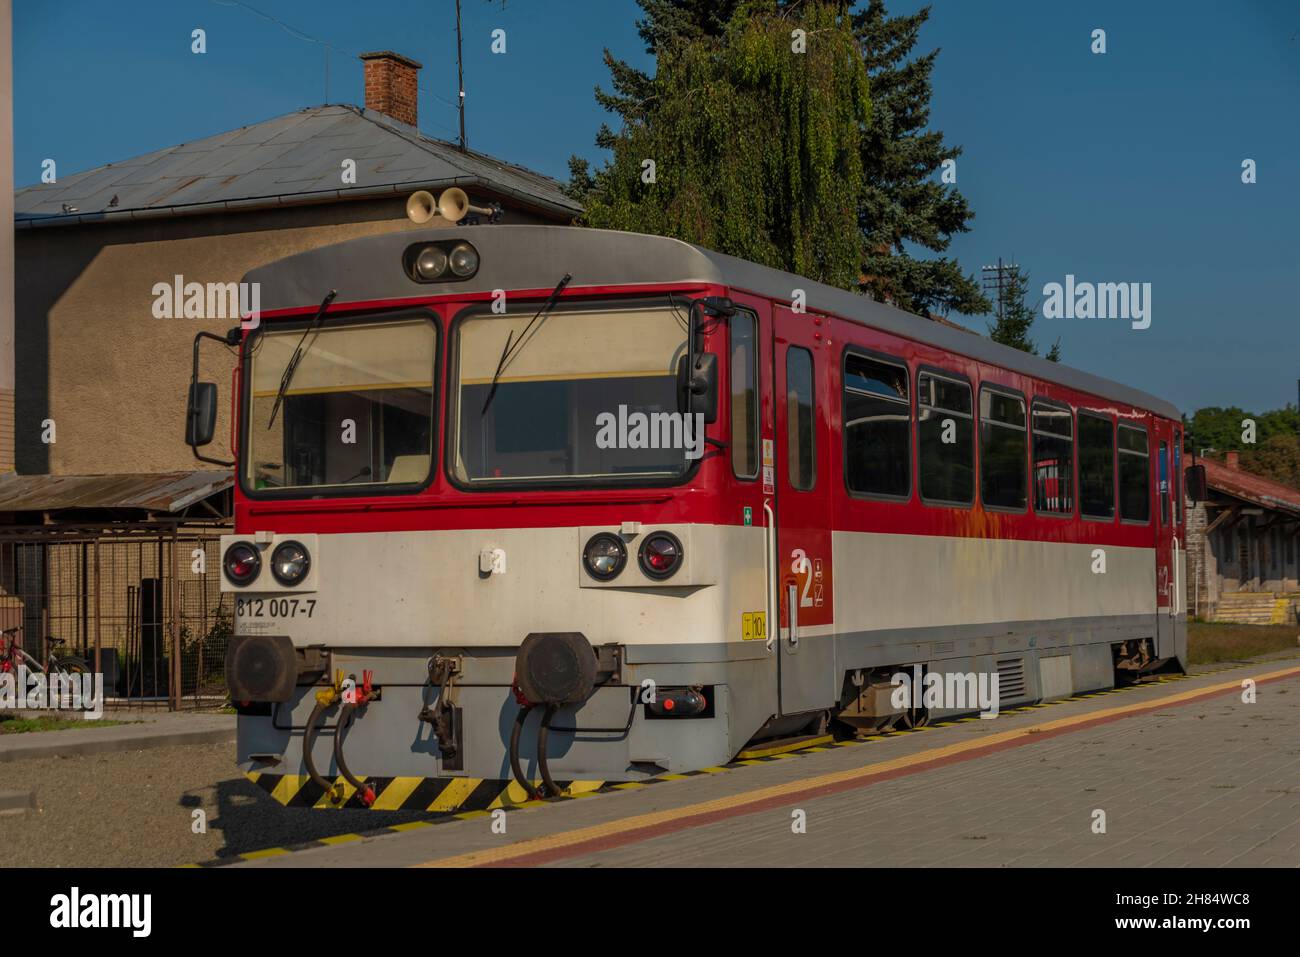 Station with train in Rimavska Sobota town in summer hot color blue sky morning Stock Photo